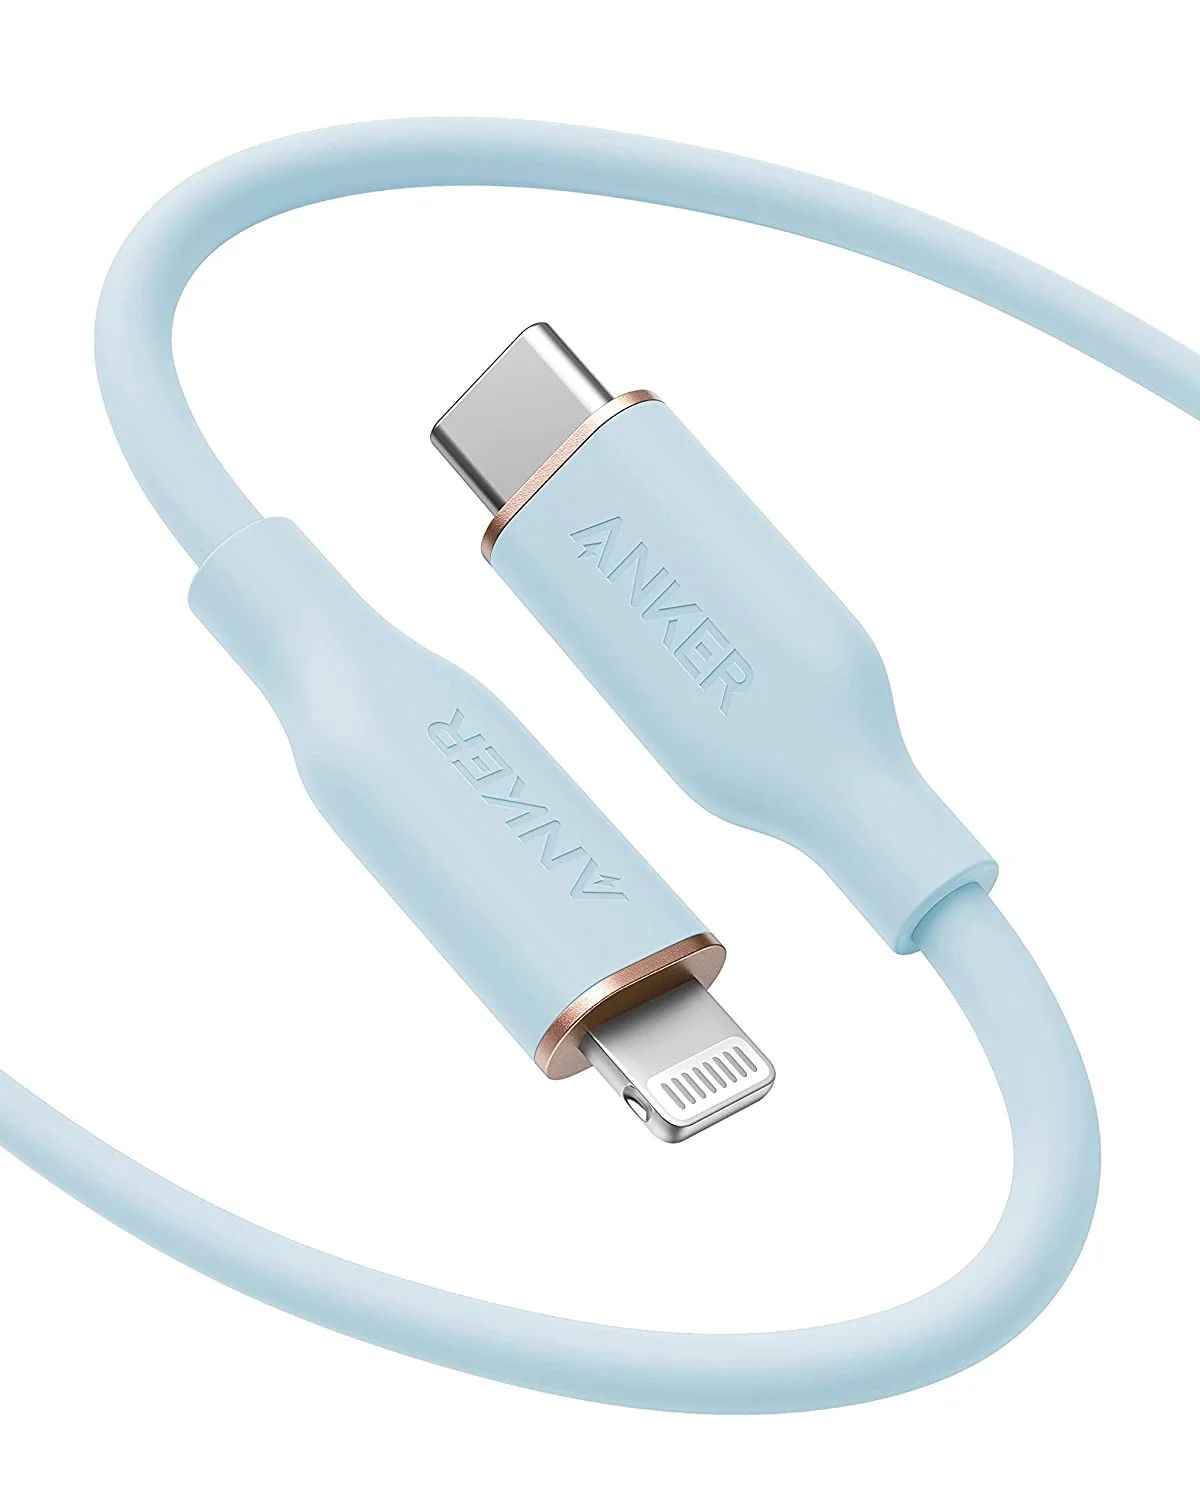 Anker 641 USB-C to Lightning Cable (Flow, 6ft Silicone) | Anker Innovations Limited